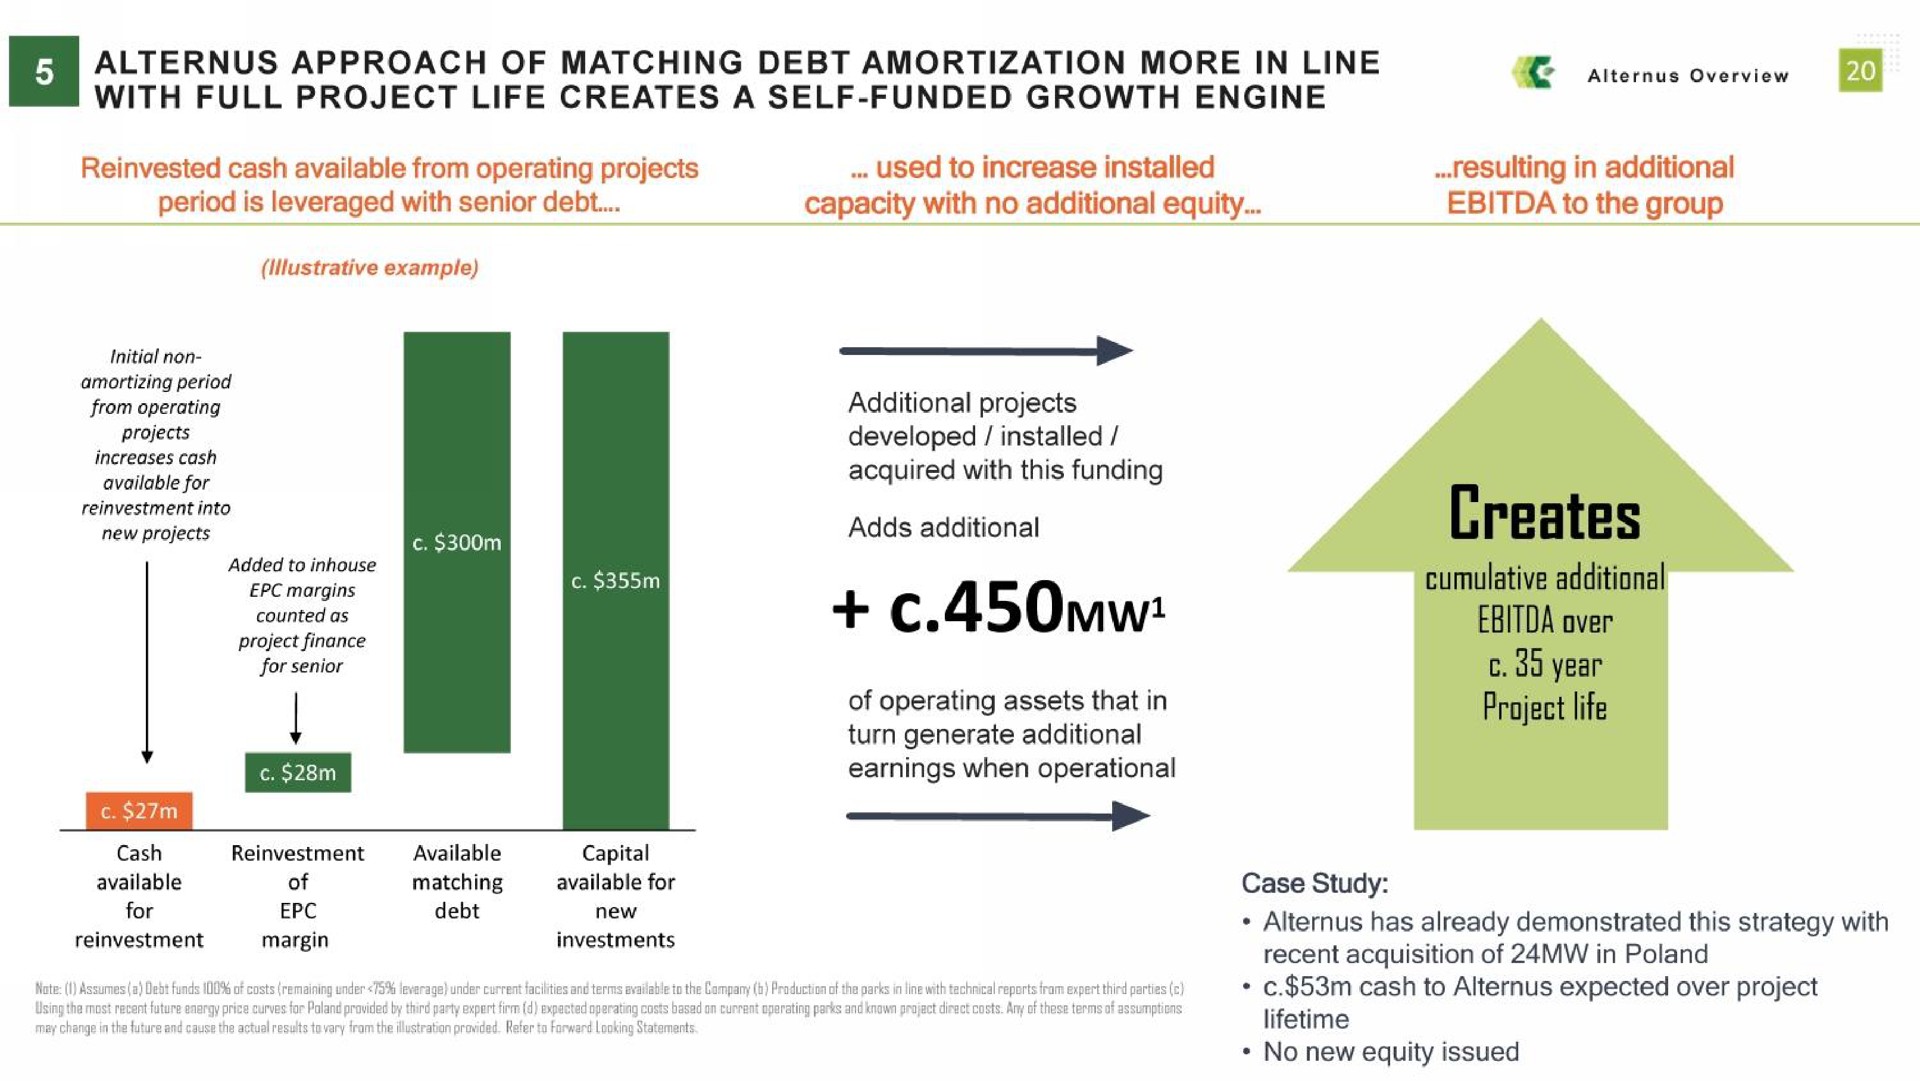 approach of matching debt amortization more in line with full project life creates a self funded growth engine creates cumulative additional over do year project life | Alternus Energy